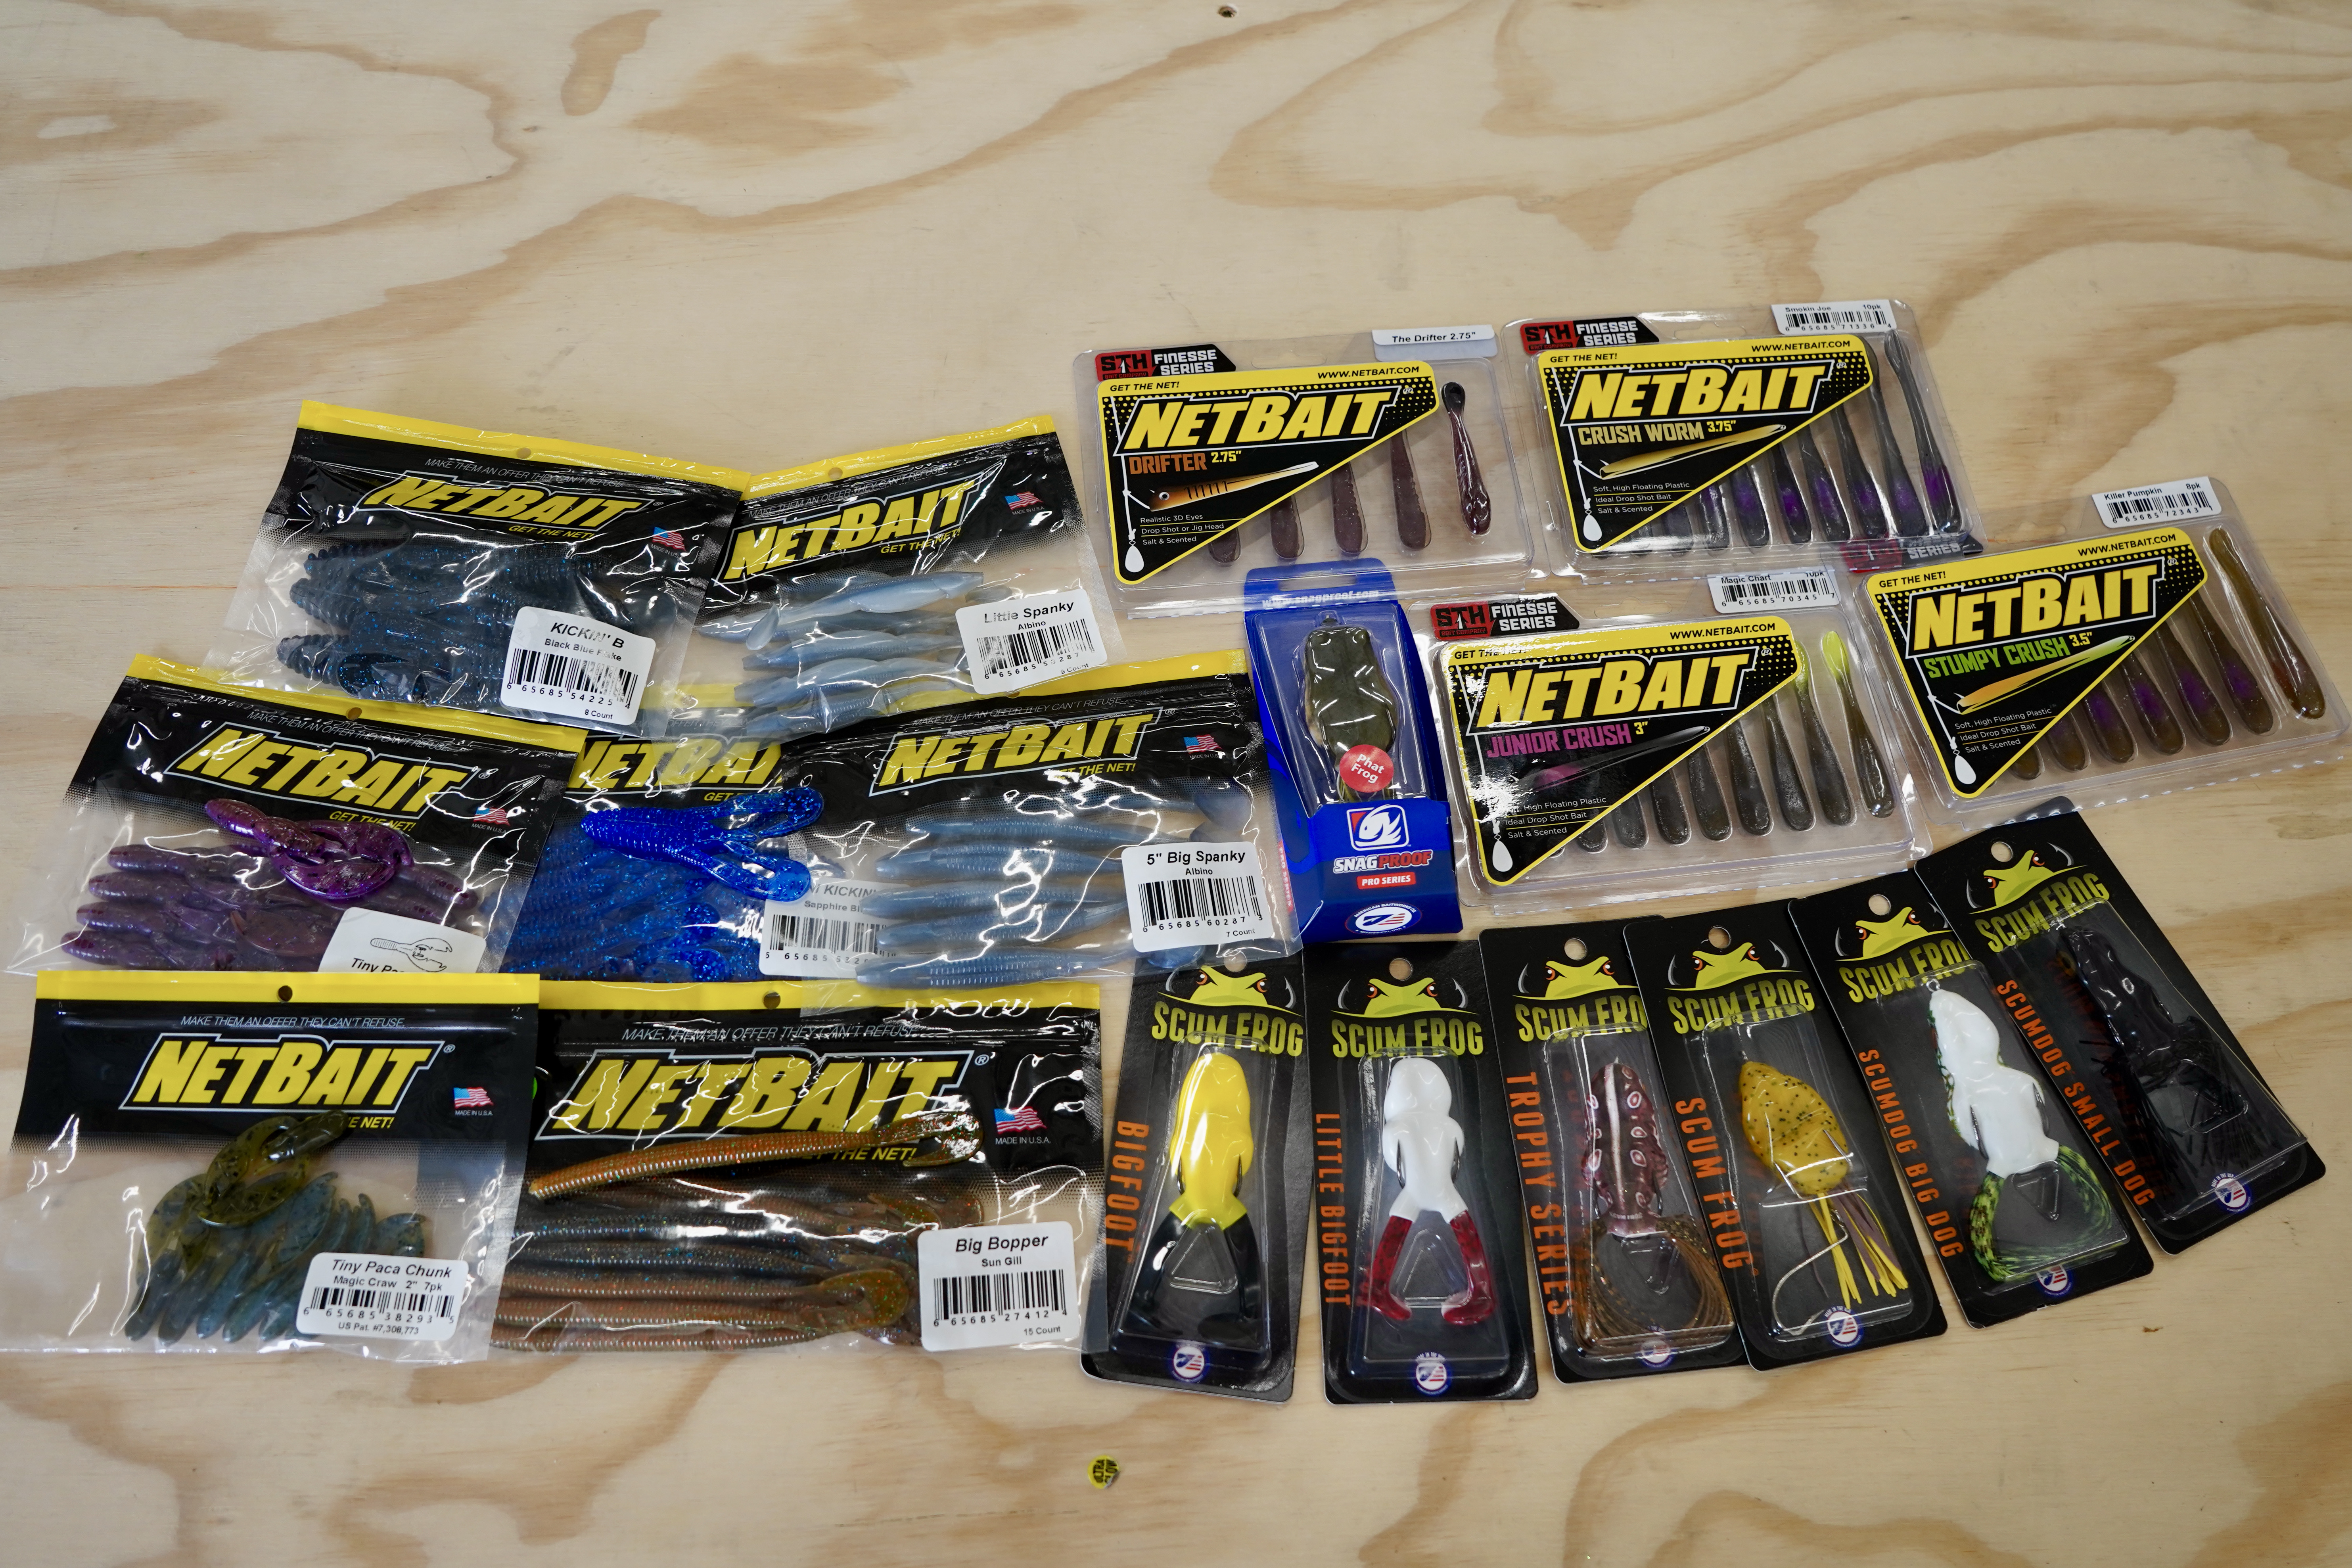 Just Landed: NetBait Expansion and More Frogs